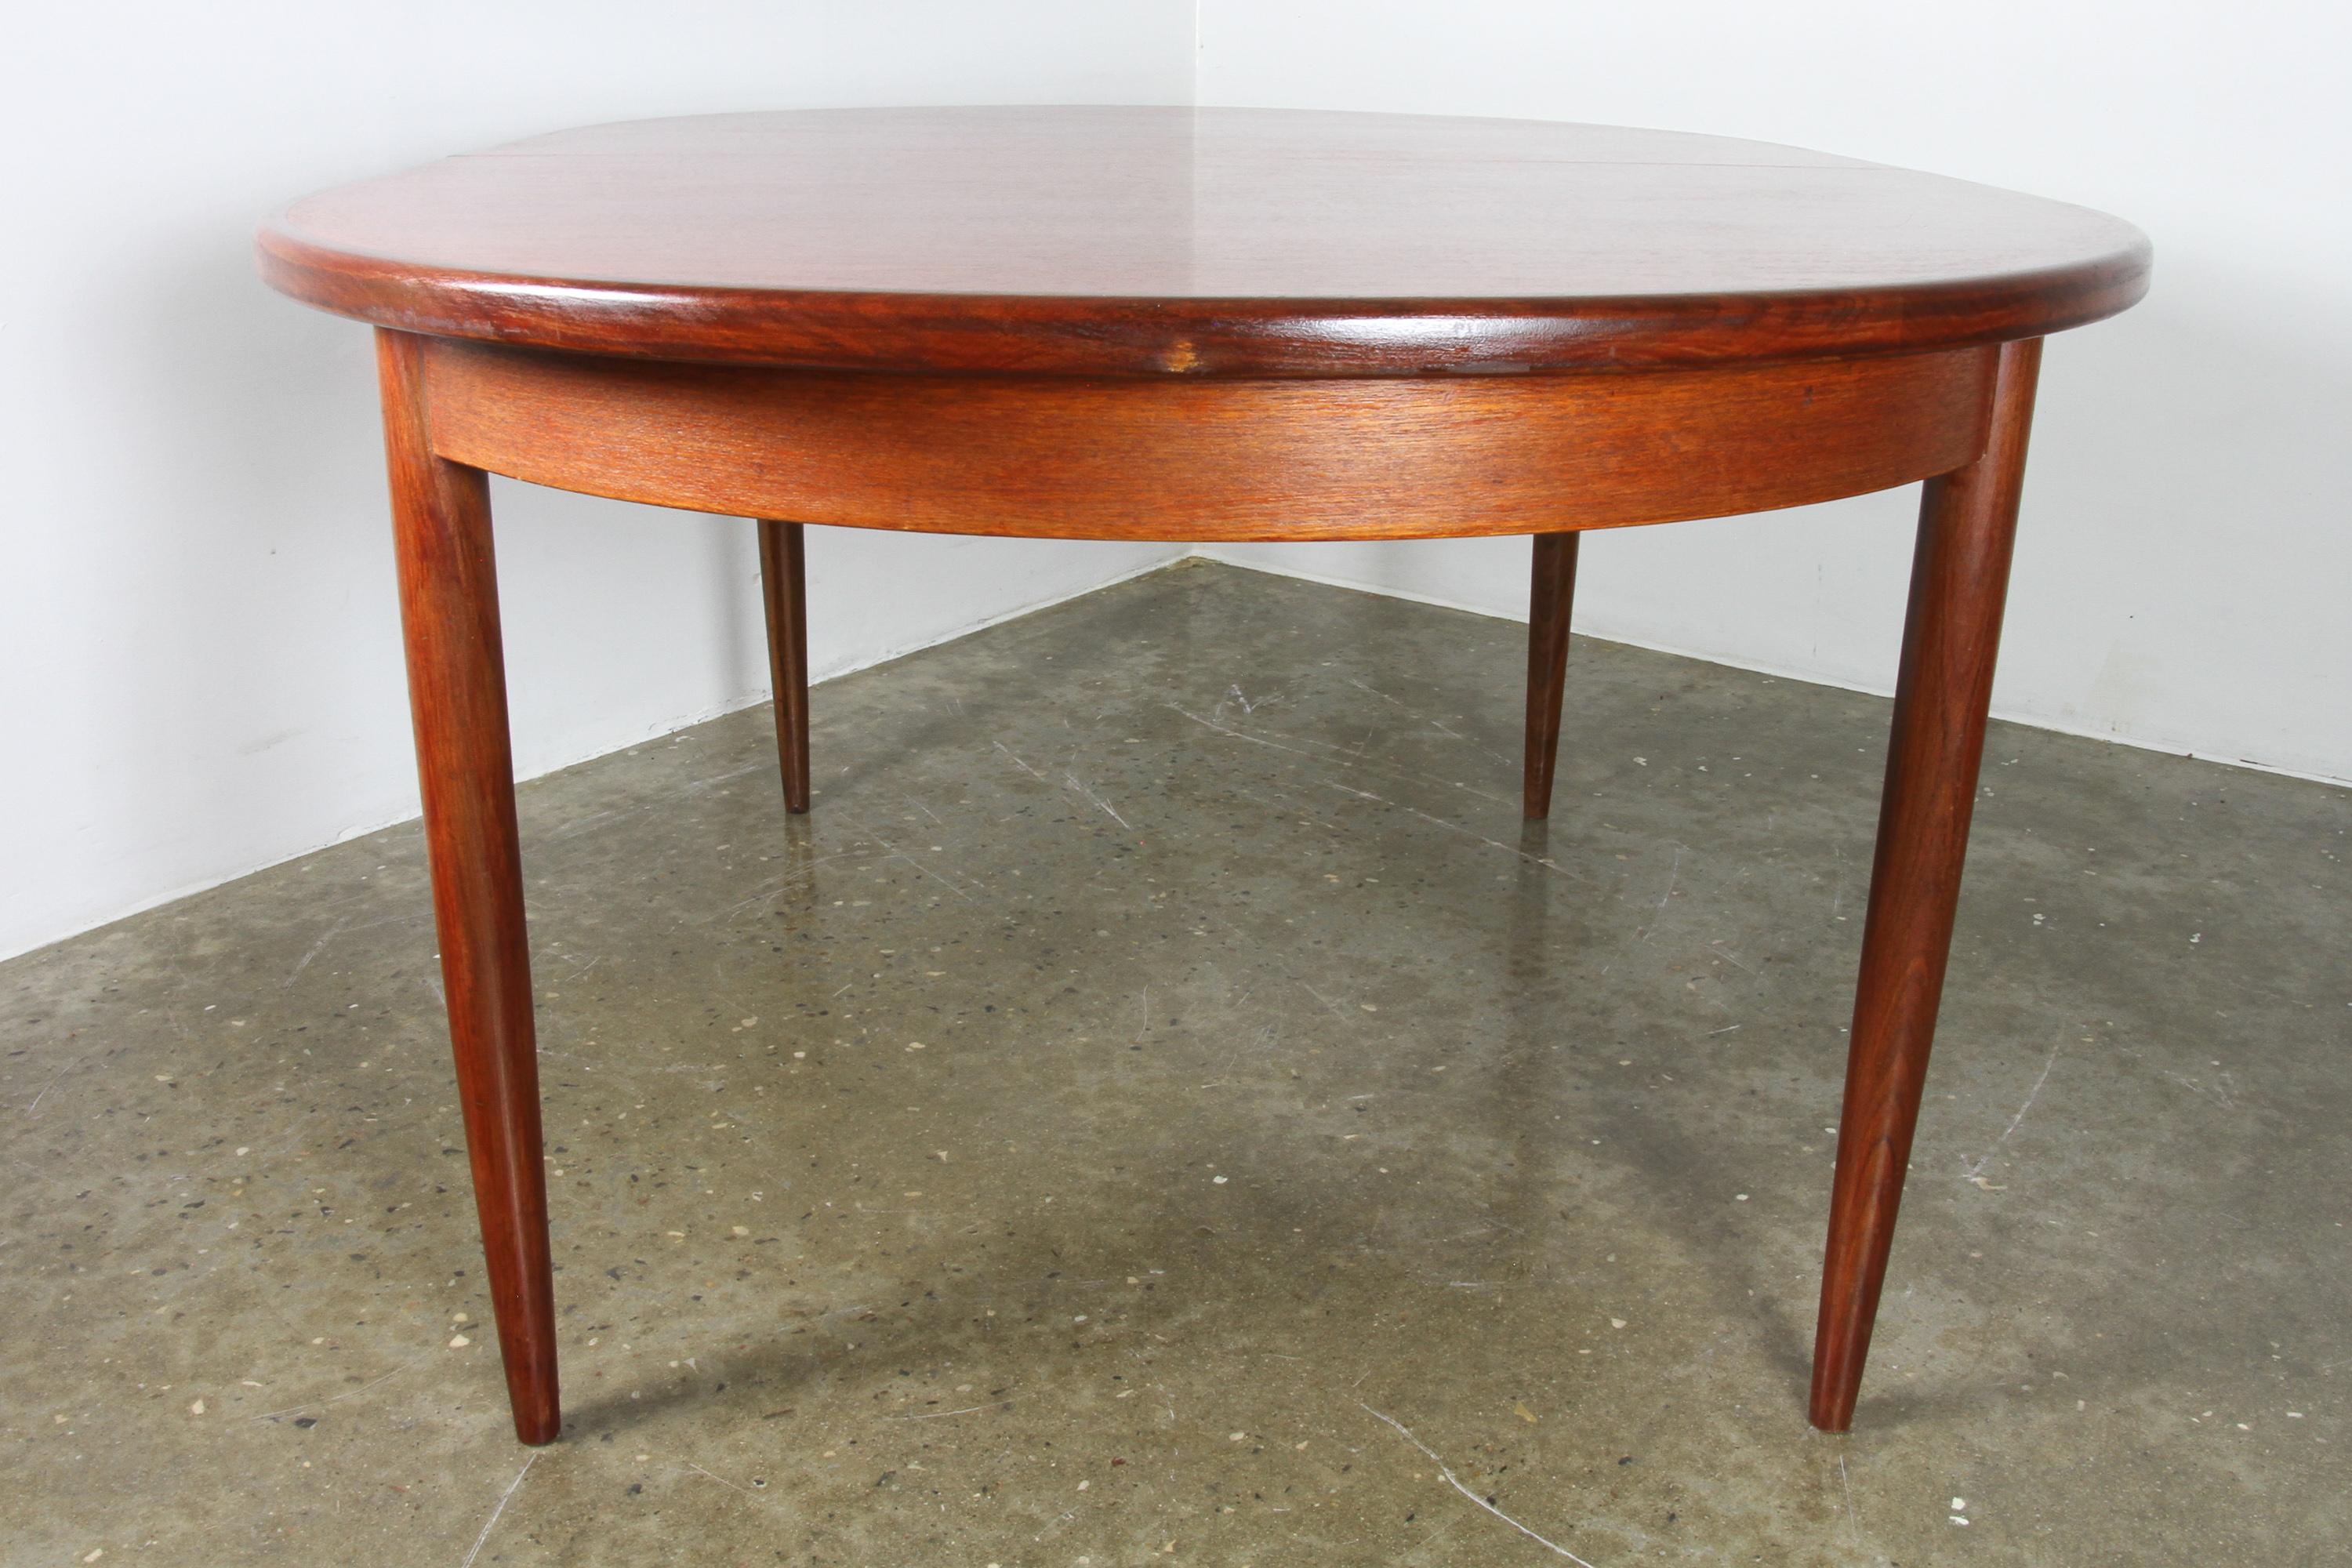 Mid-20th Century Vintage Oval Extendable Teak and Redwood Dining Table by G-Plan, 1960s